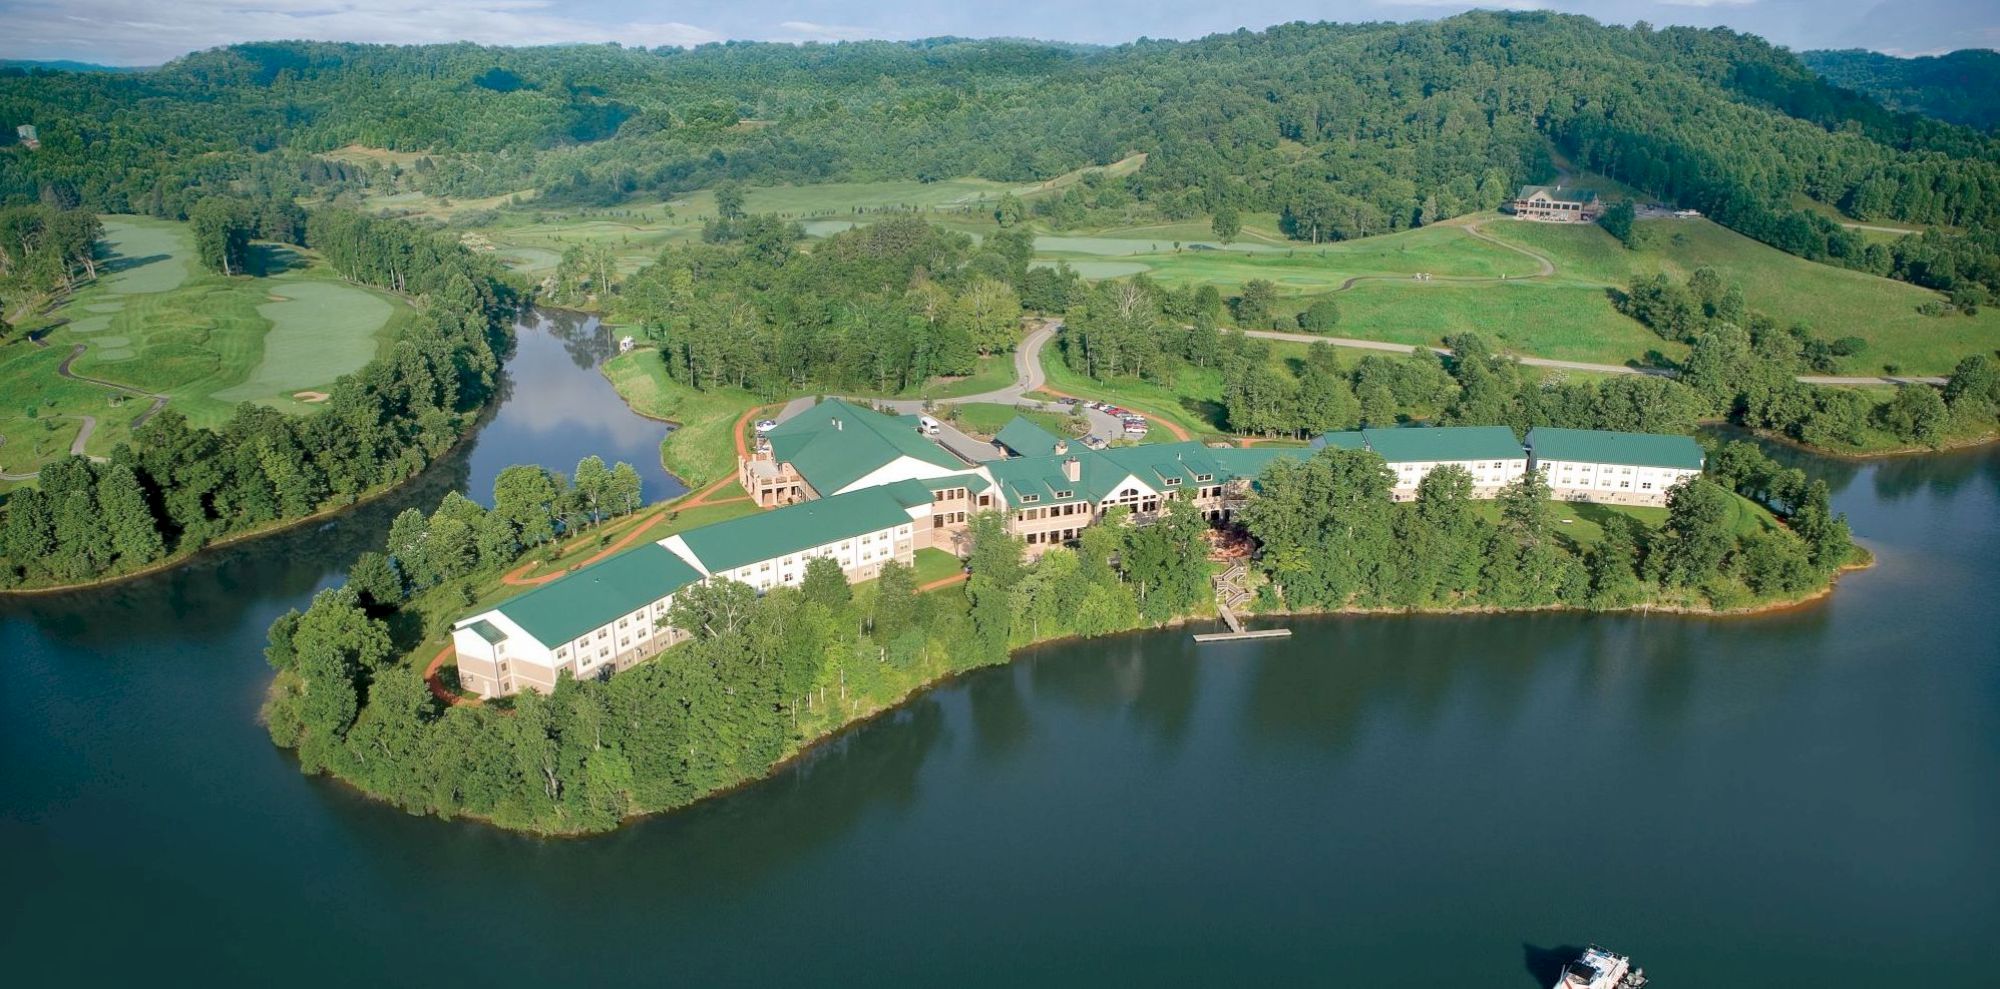 An aerial view of a large complex with green roofs situated on a wooded peninsula surrounded by a lake, with hilly terrain in the background.